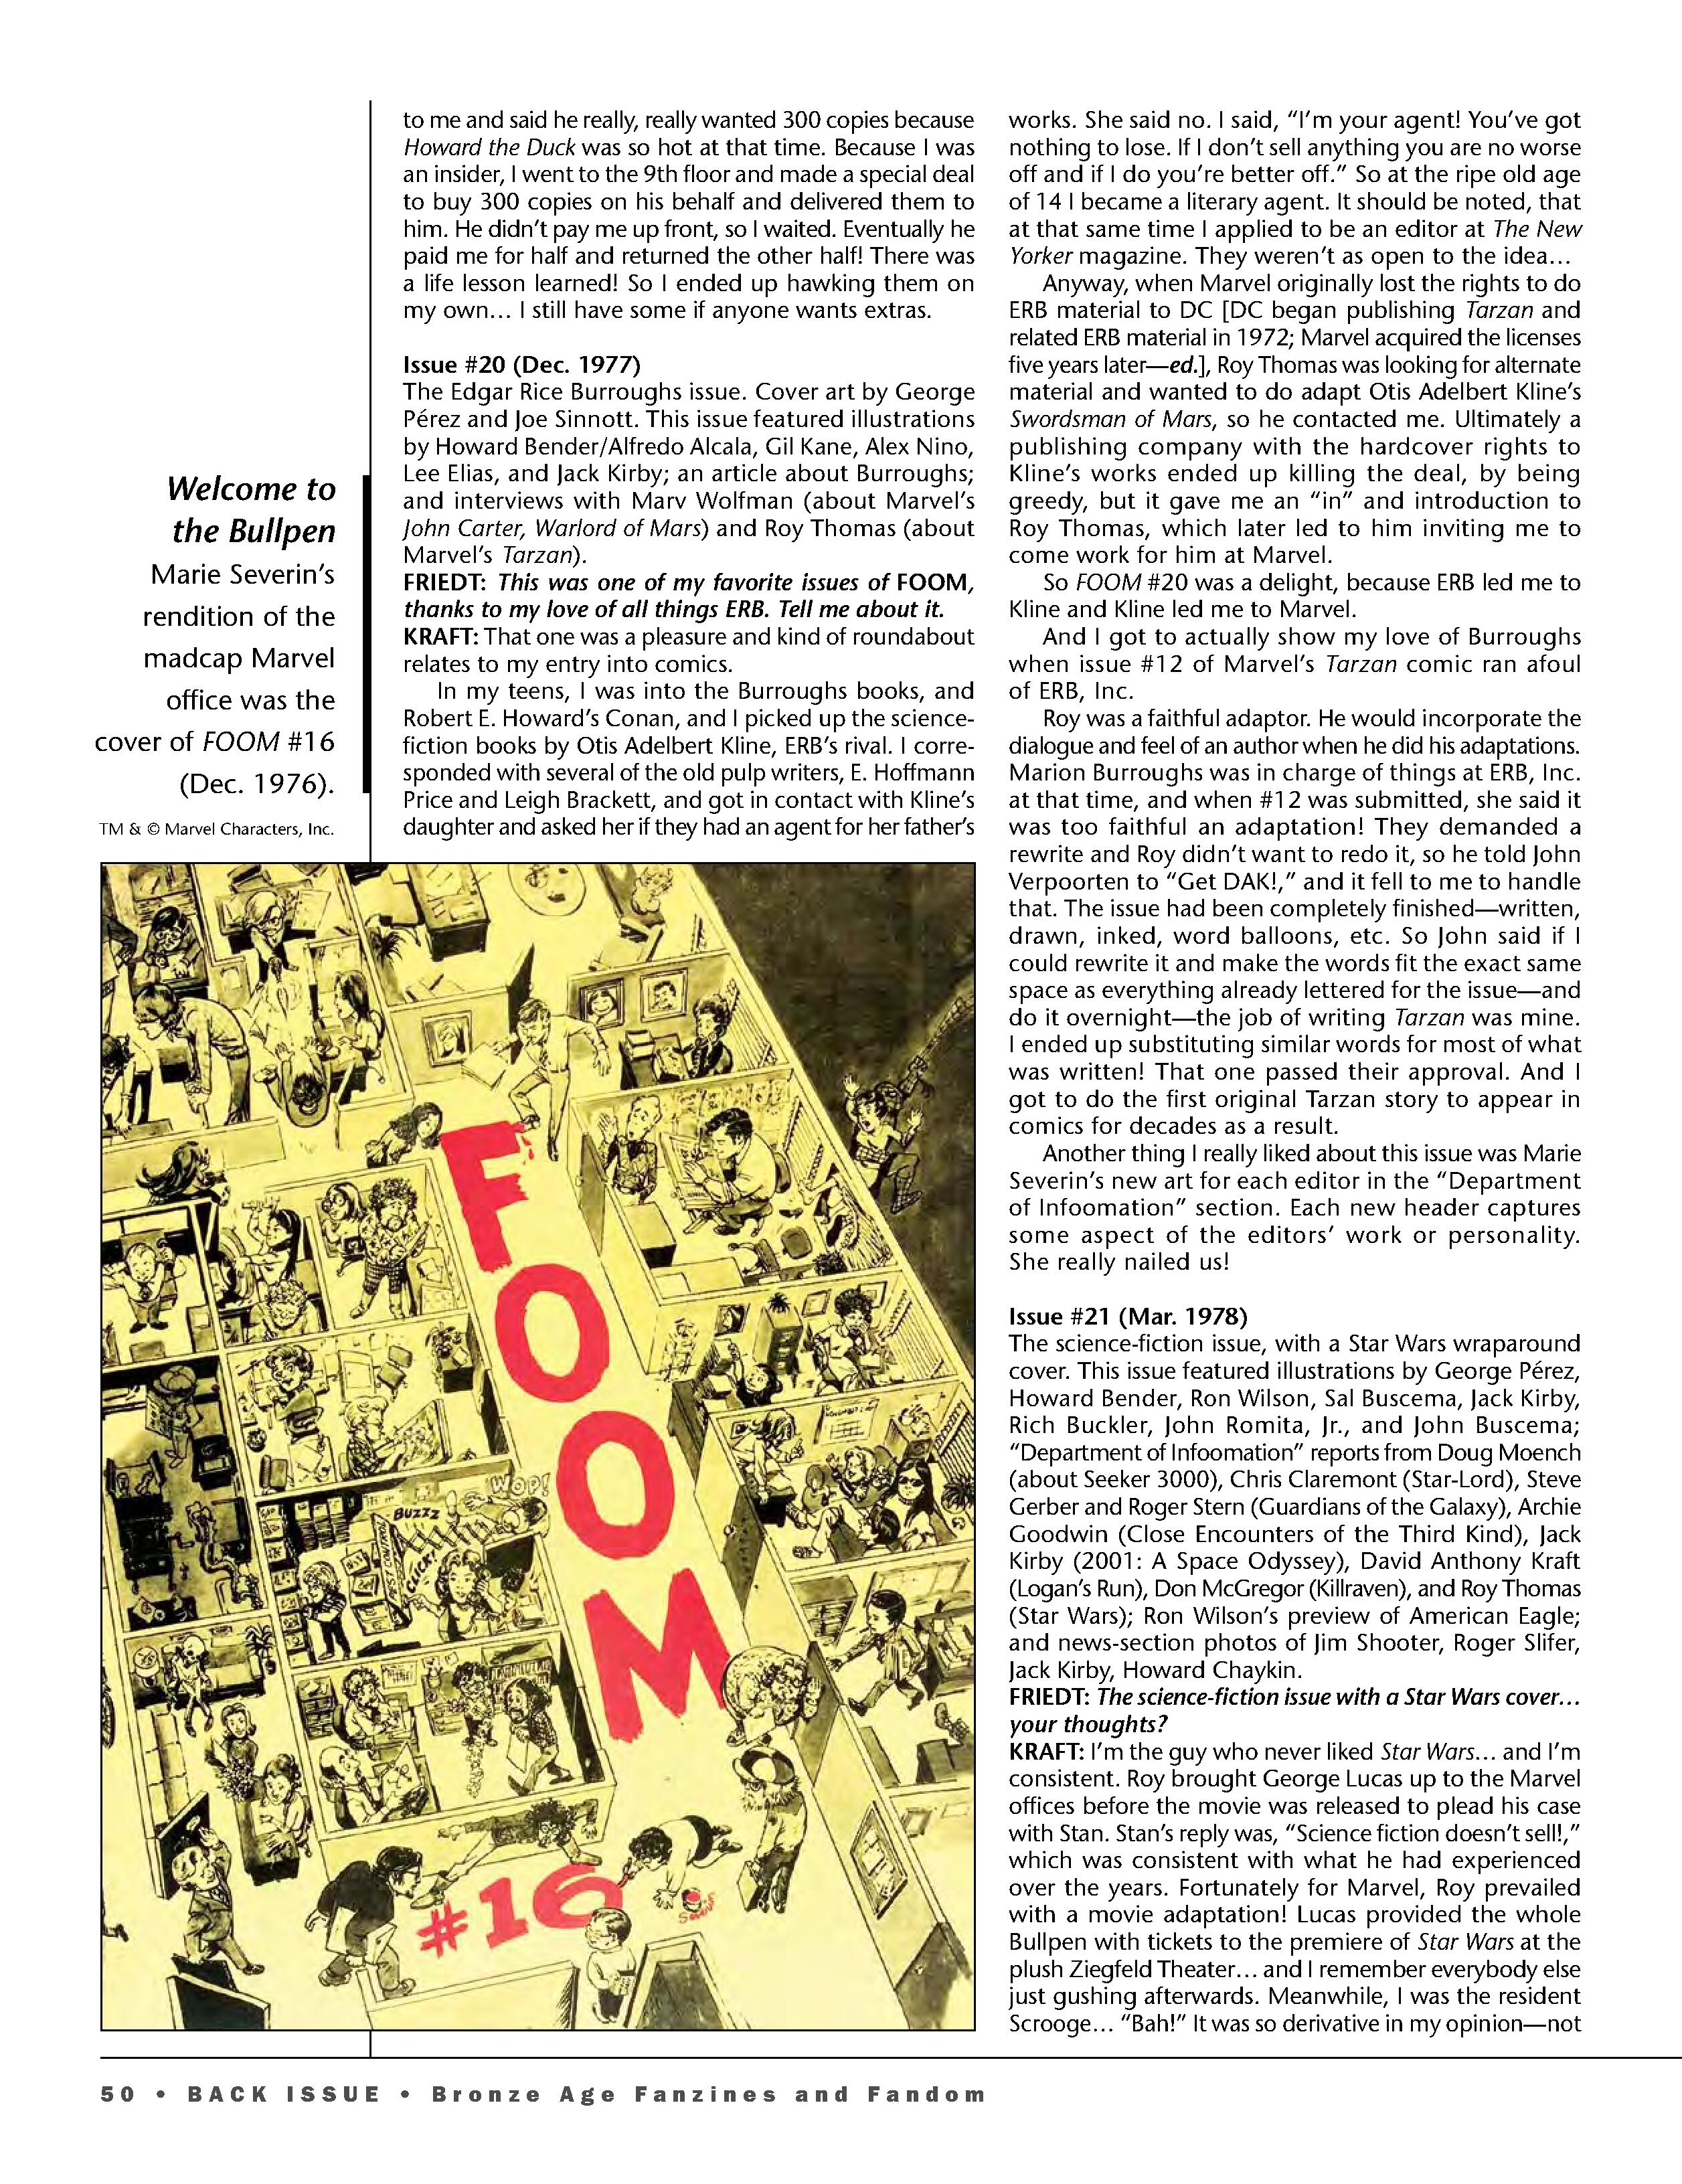 Read online Back Issue comic -  Issue #100 - 52